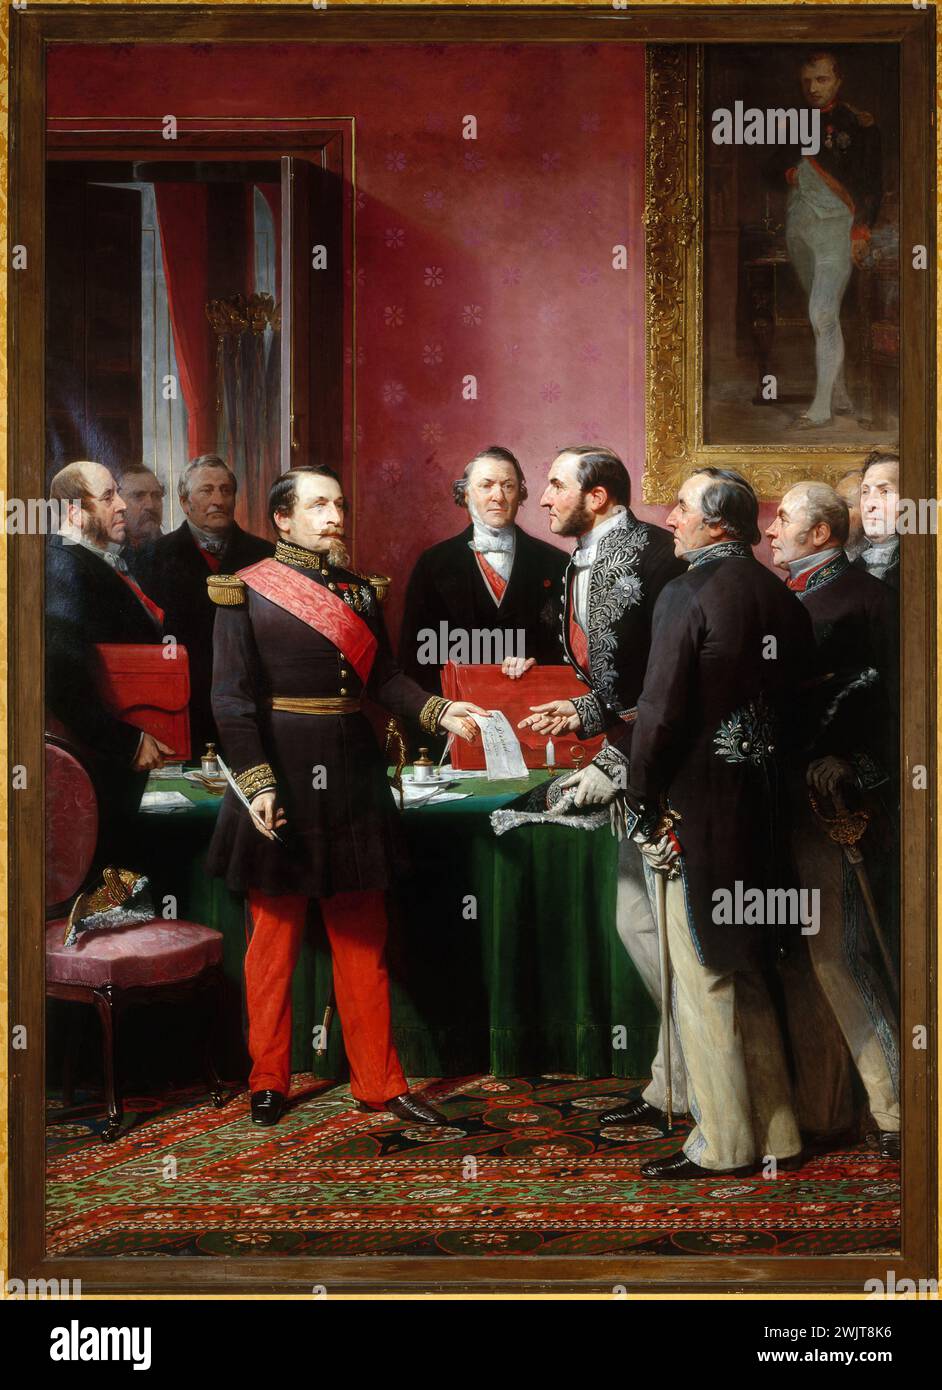 Adolphe Yvon (1817-1893). 'Napoleon III handing over to Baron Haussmann the annexation decree of the neighboring municipalities (February 16, 1859)'. Oil on canvas, 1865. Paris, Carnavalet museum. 35045-11 Administrator, Official Ceremony, Decret, French Emperor, French politician, Second Empire, Oil on canvas Stock Photo